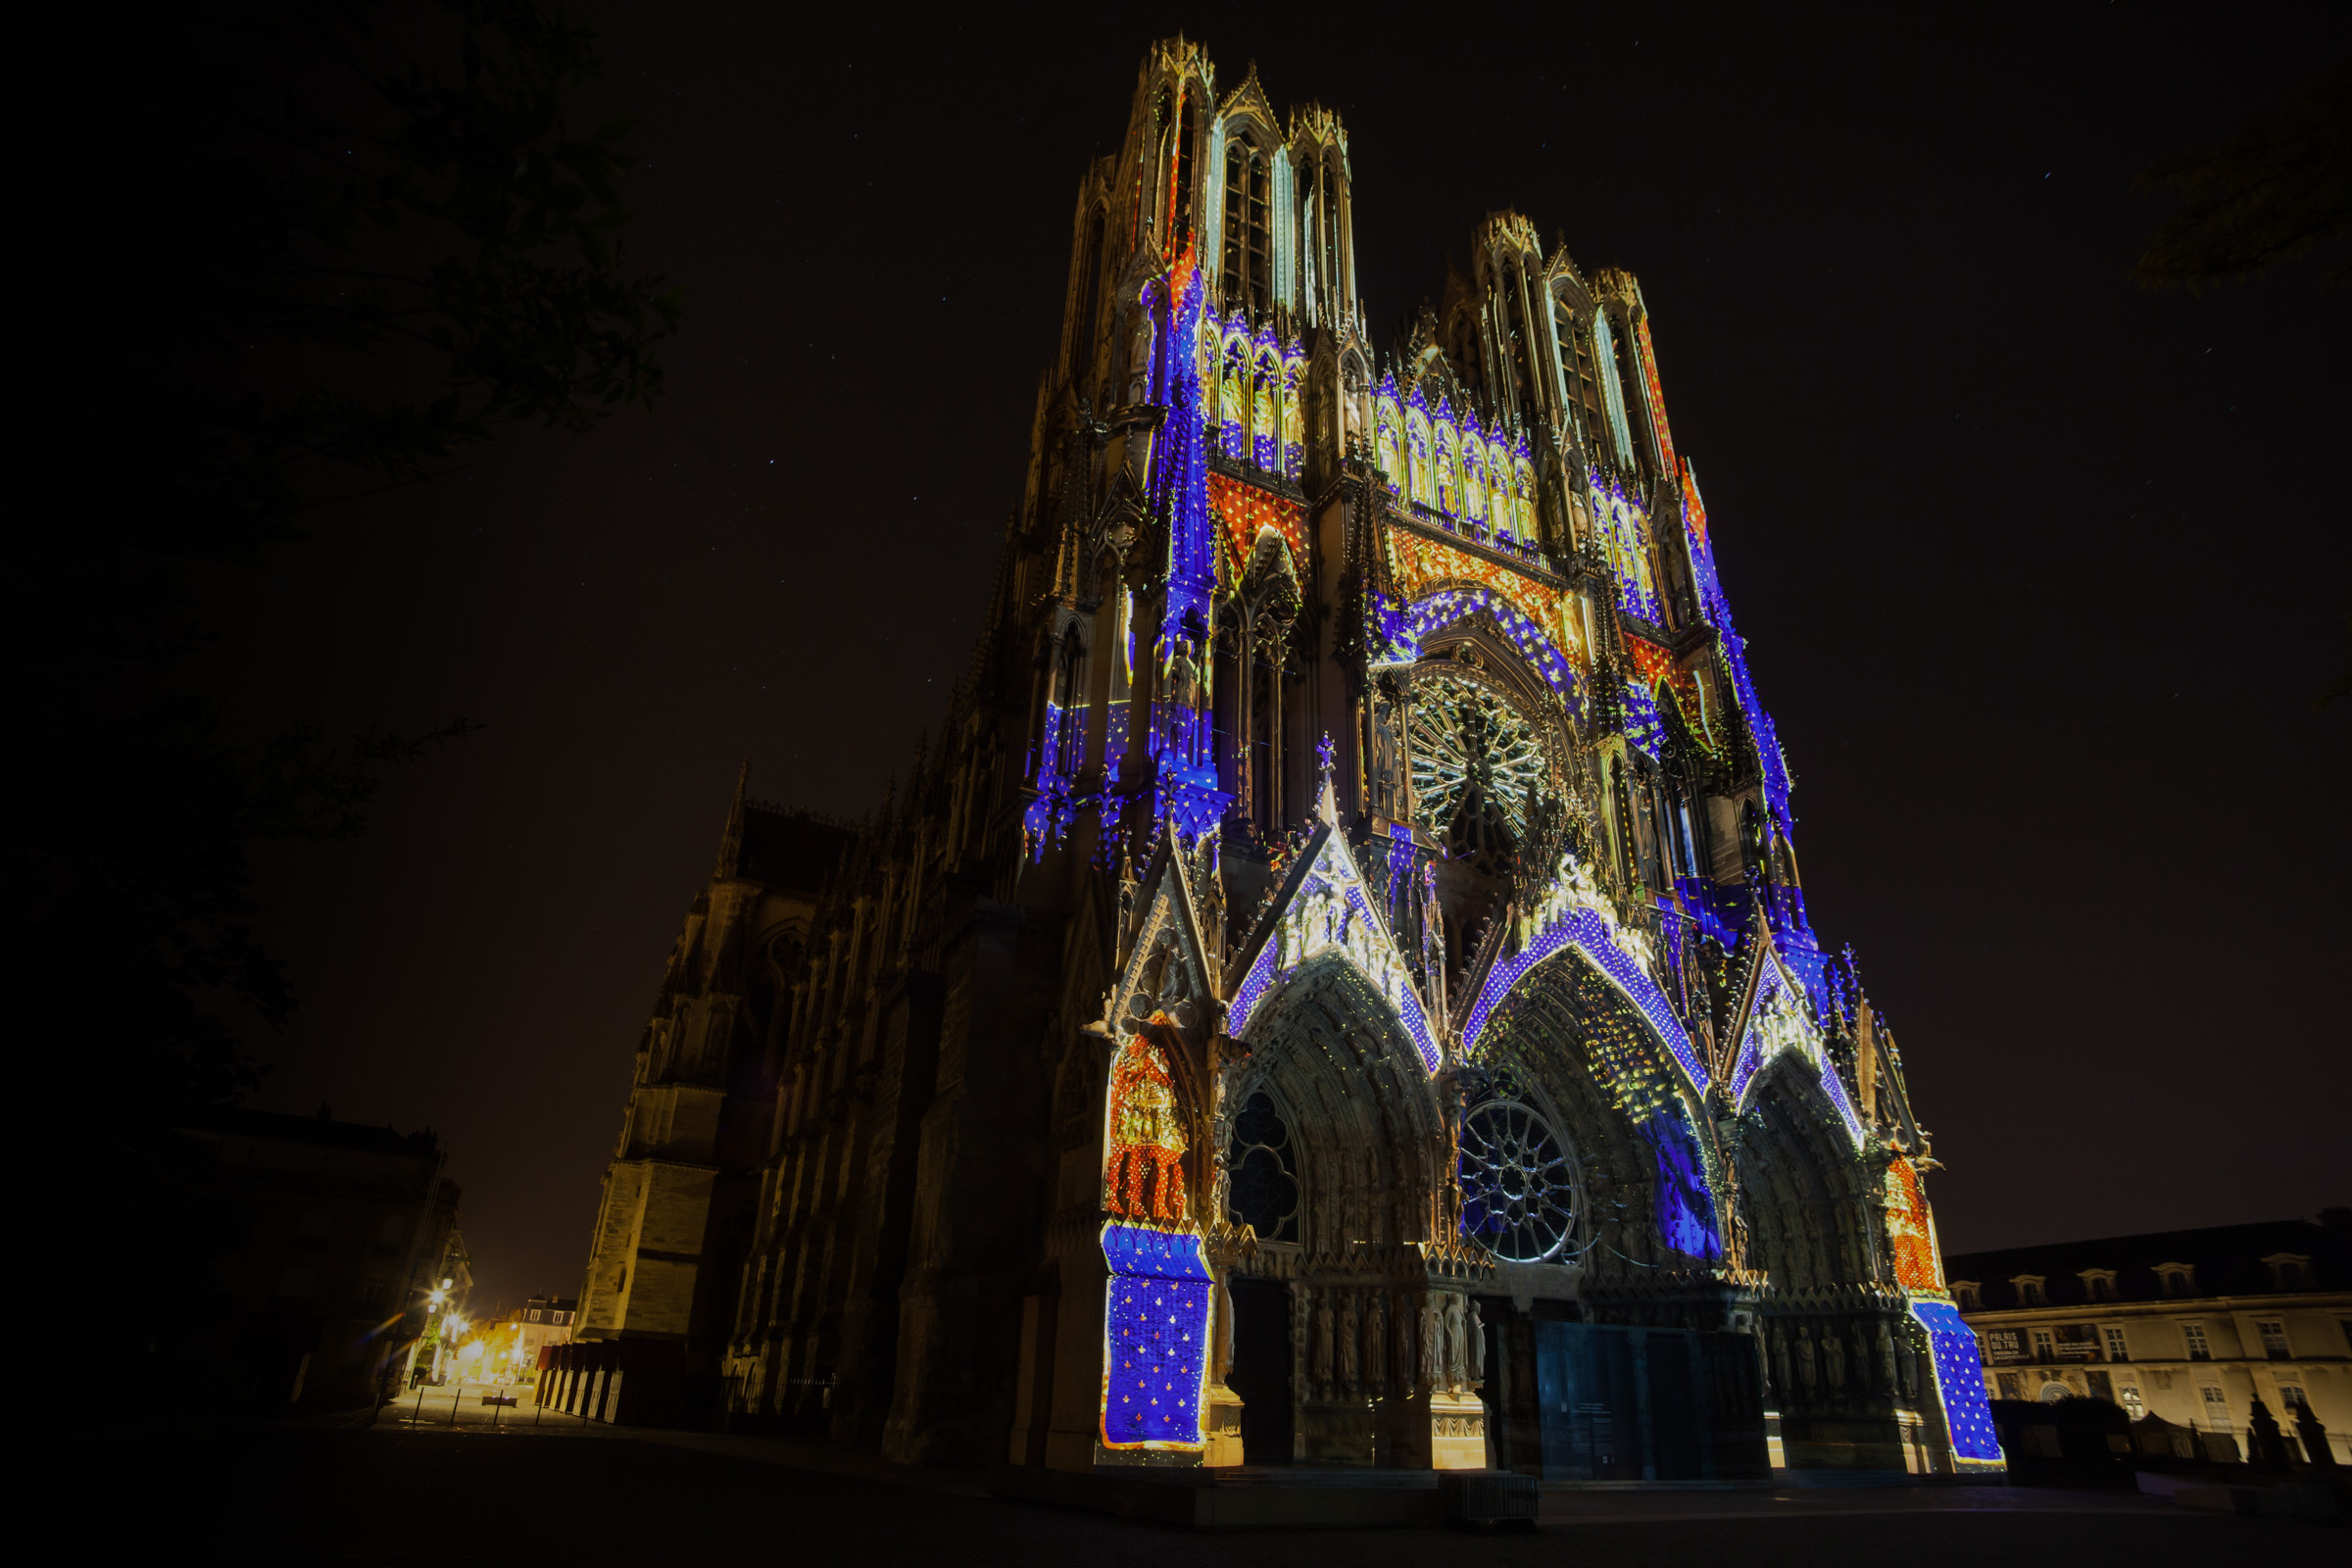 Regalia at the Reims Cathedral - CODAworx